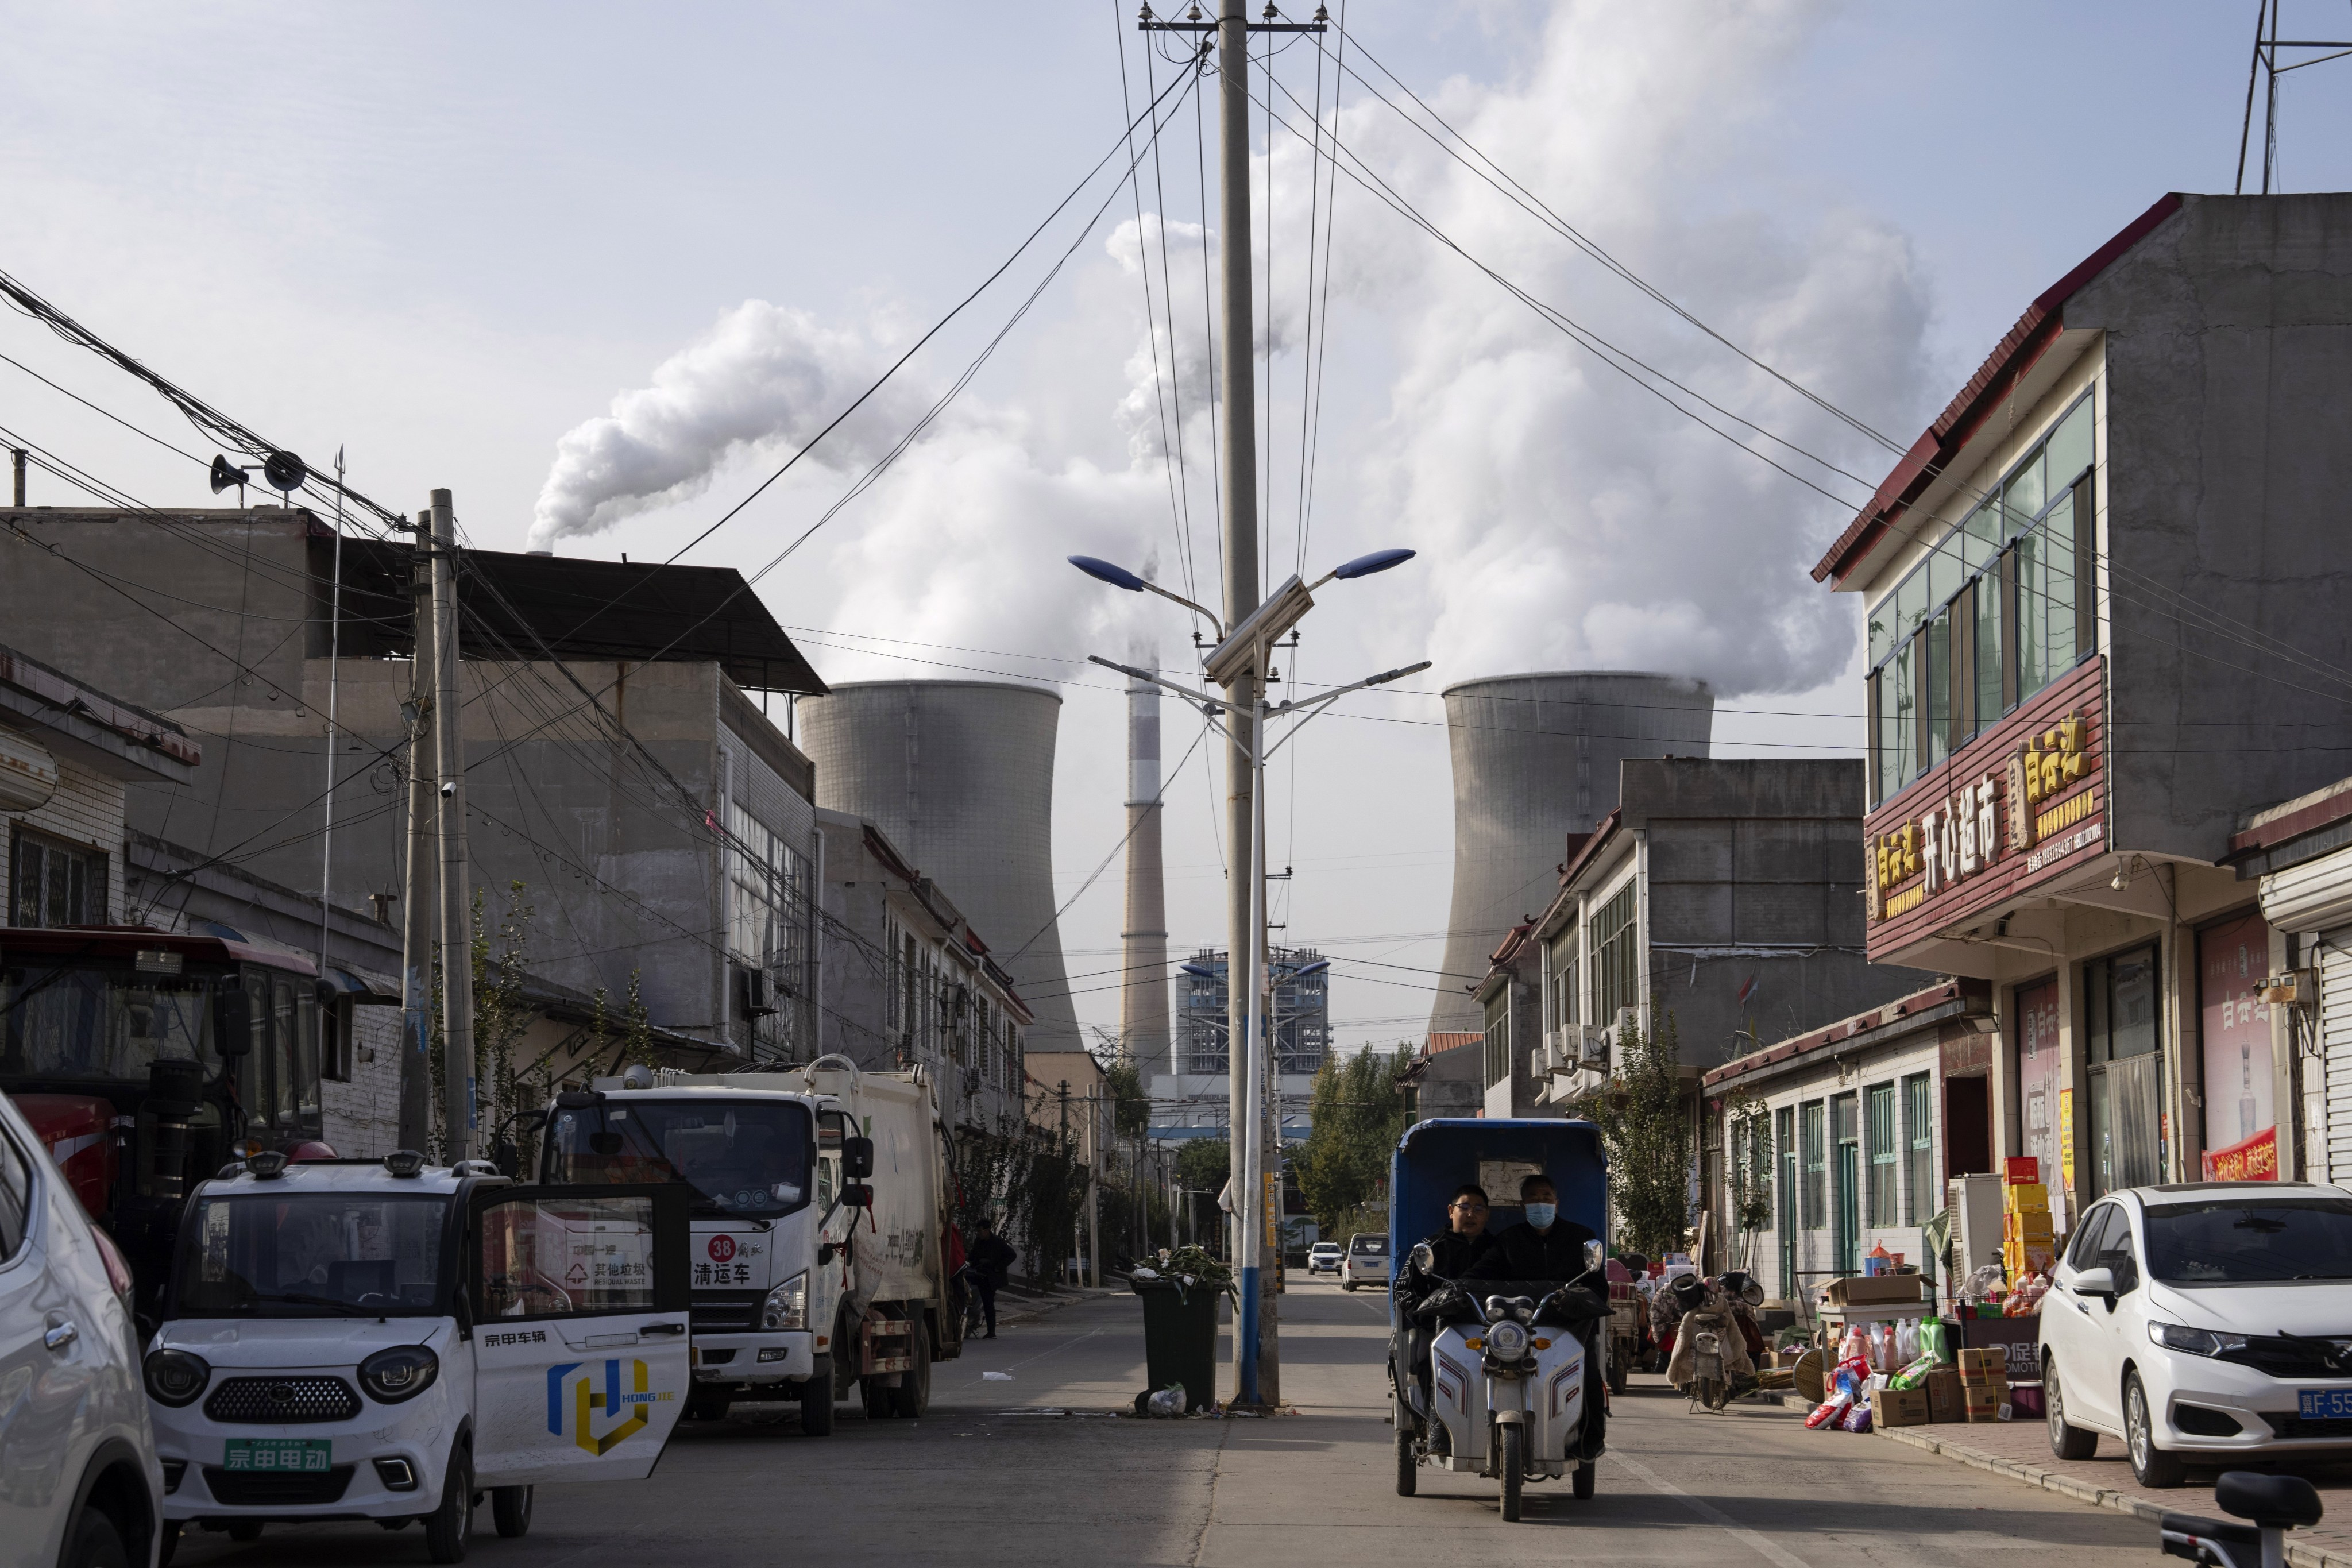 A coal-fired power plant in Dingzhou, in China’s northern Hebei province. Photo: AP